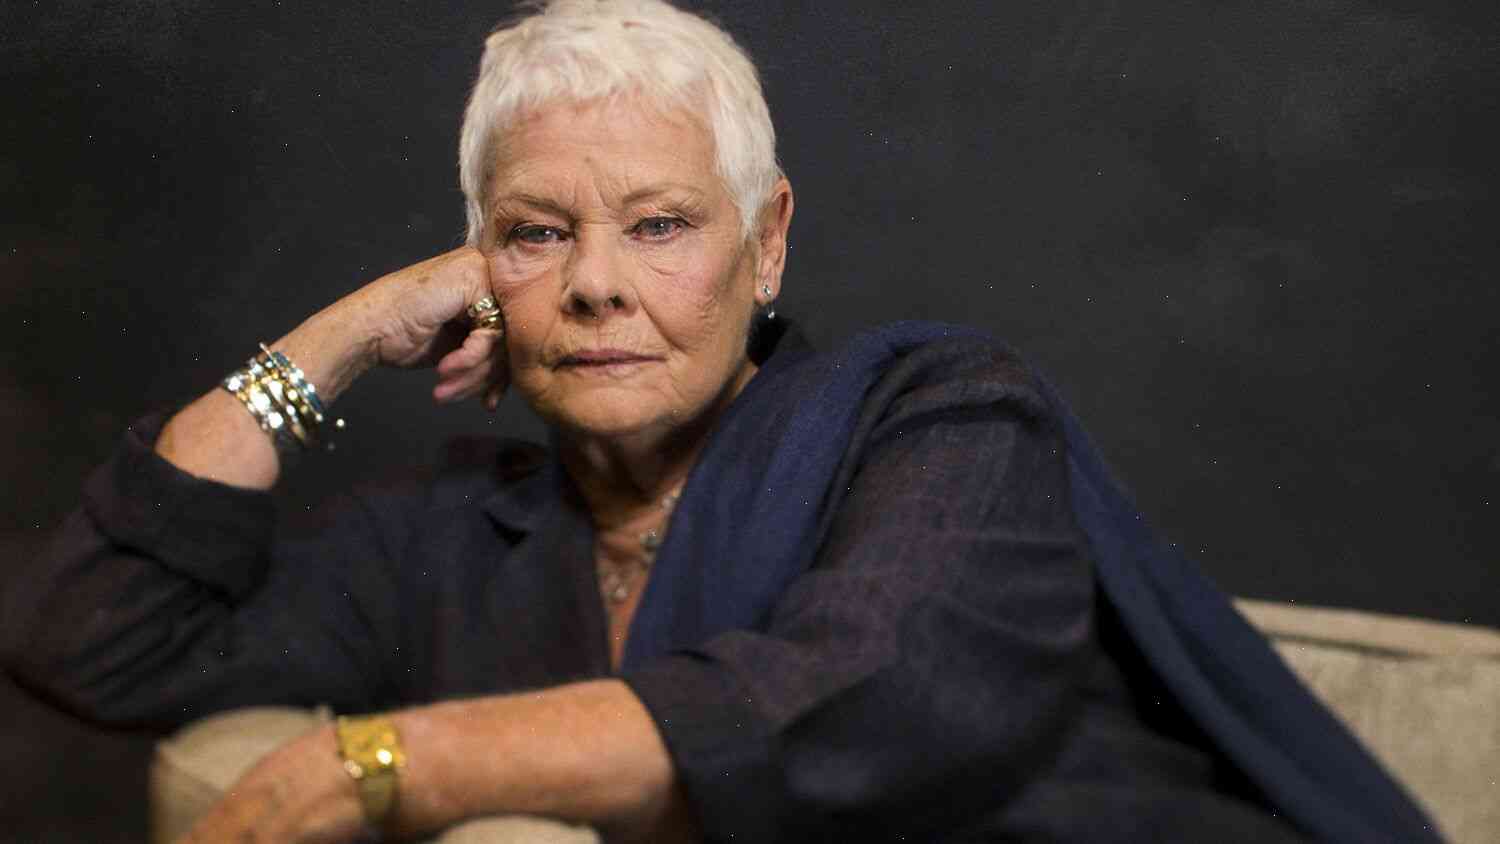 Judi Dench slammed 'The Crown' for portraying the royals as 'nice people'